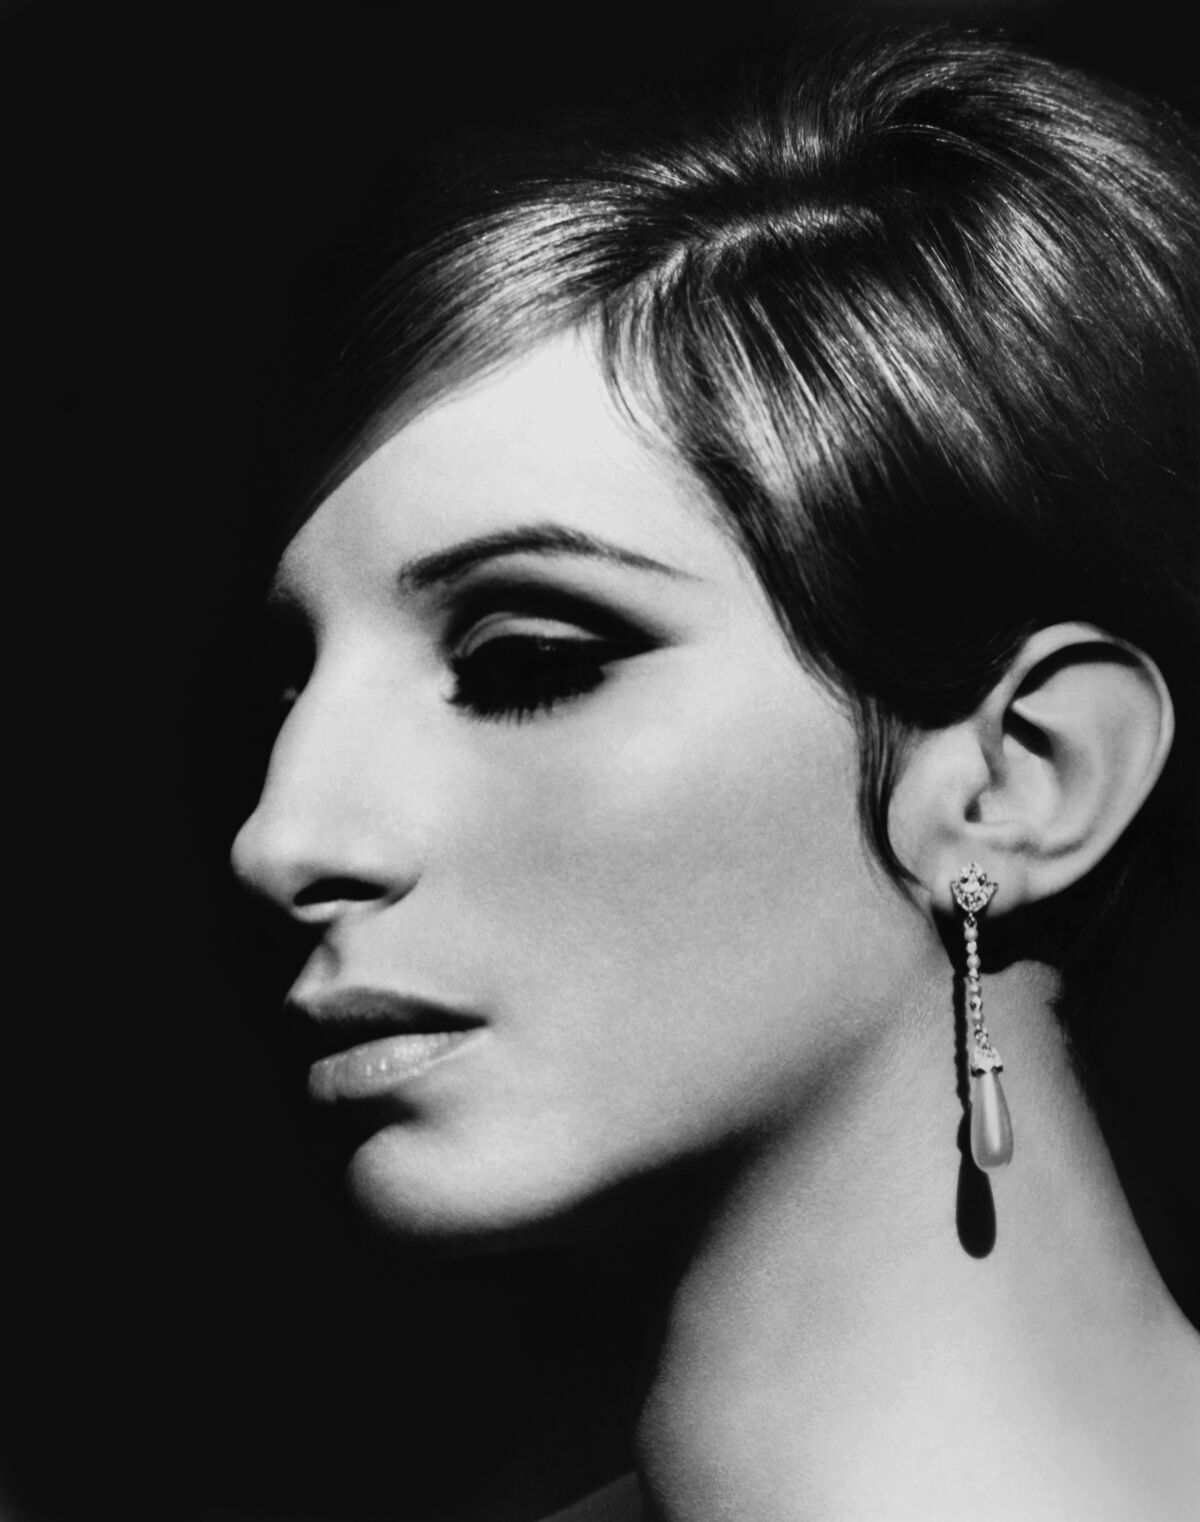 A side view of a woman with short hair, an earring and heavy eye makeup.